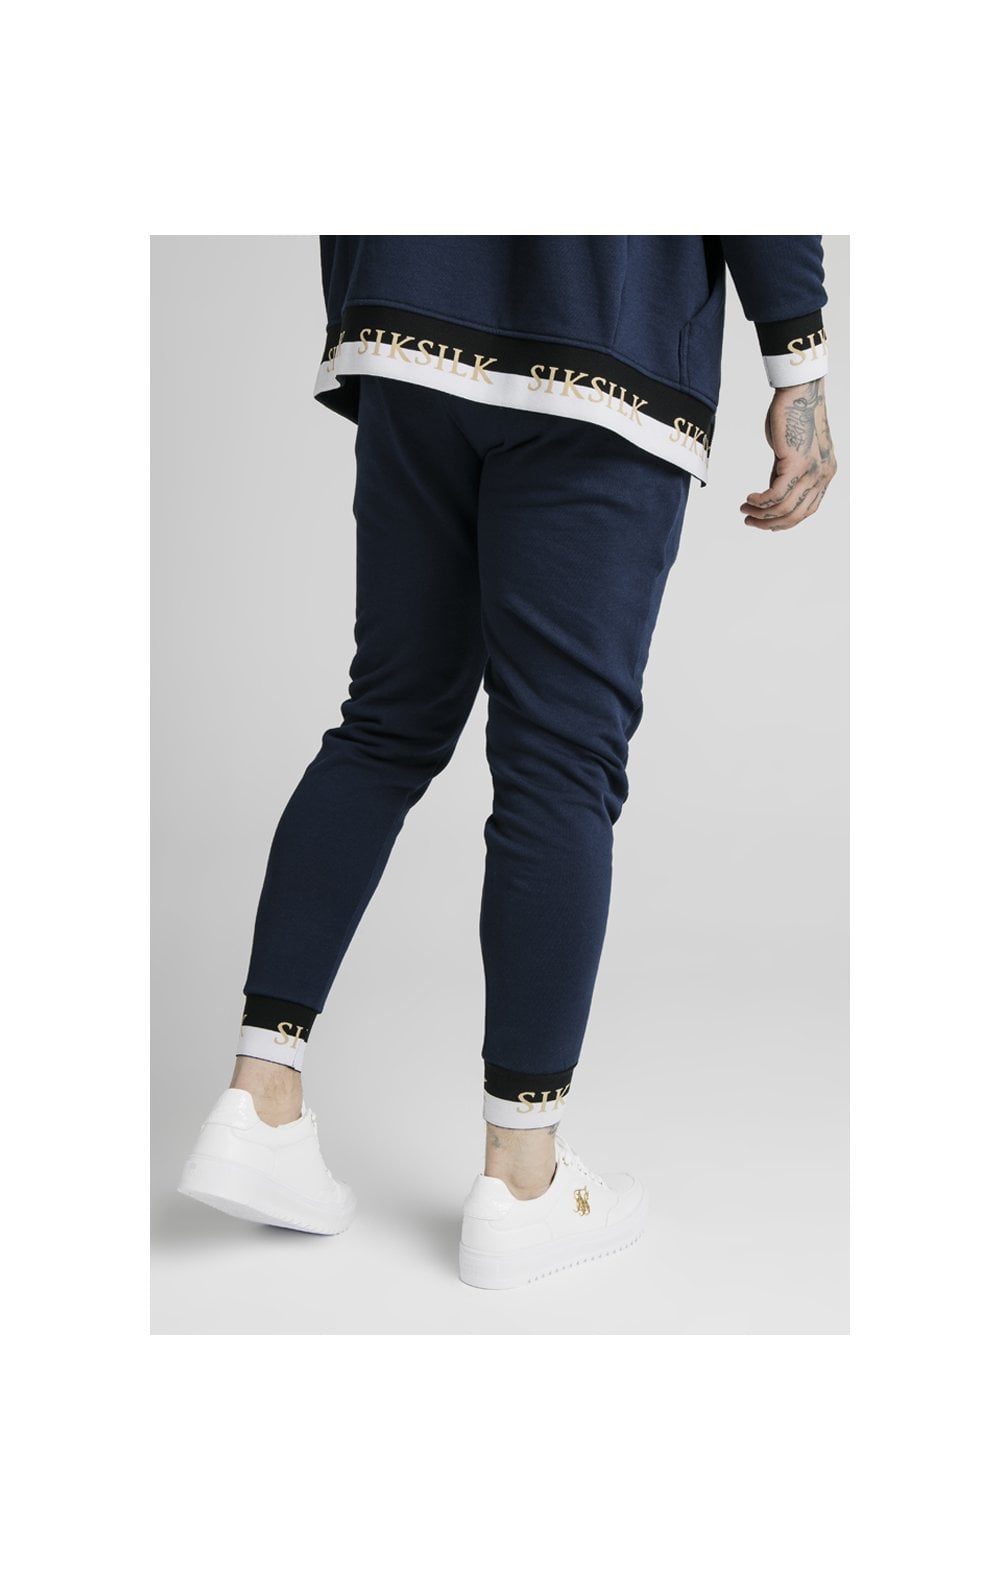 SikSilk Deluxe Fitted Jogger - Navy (5)